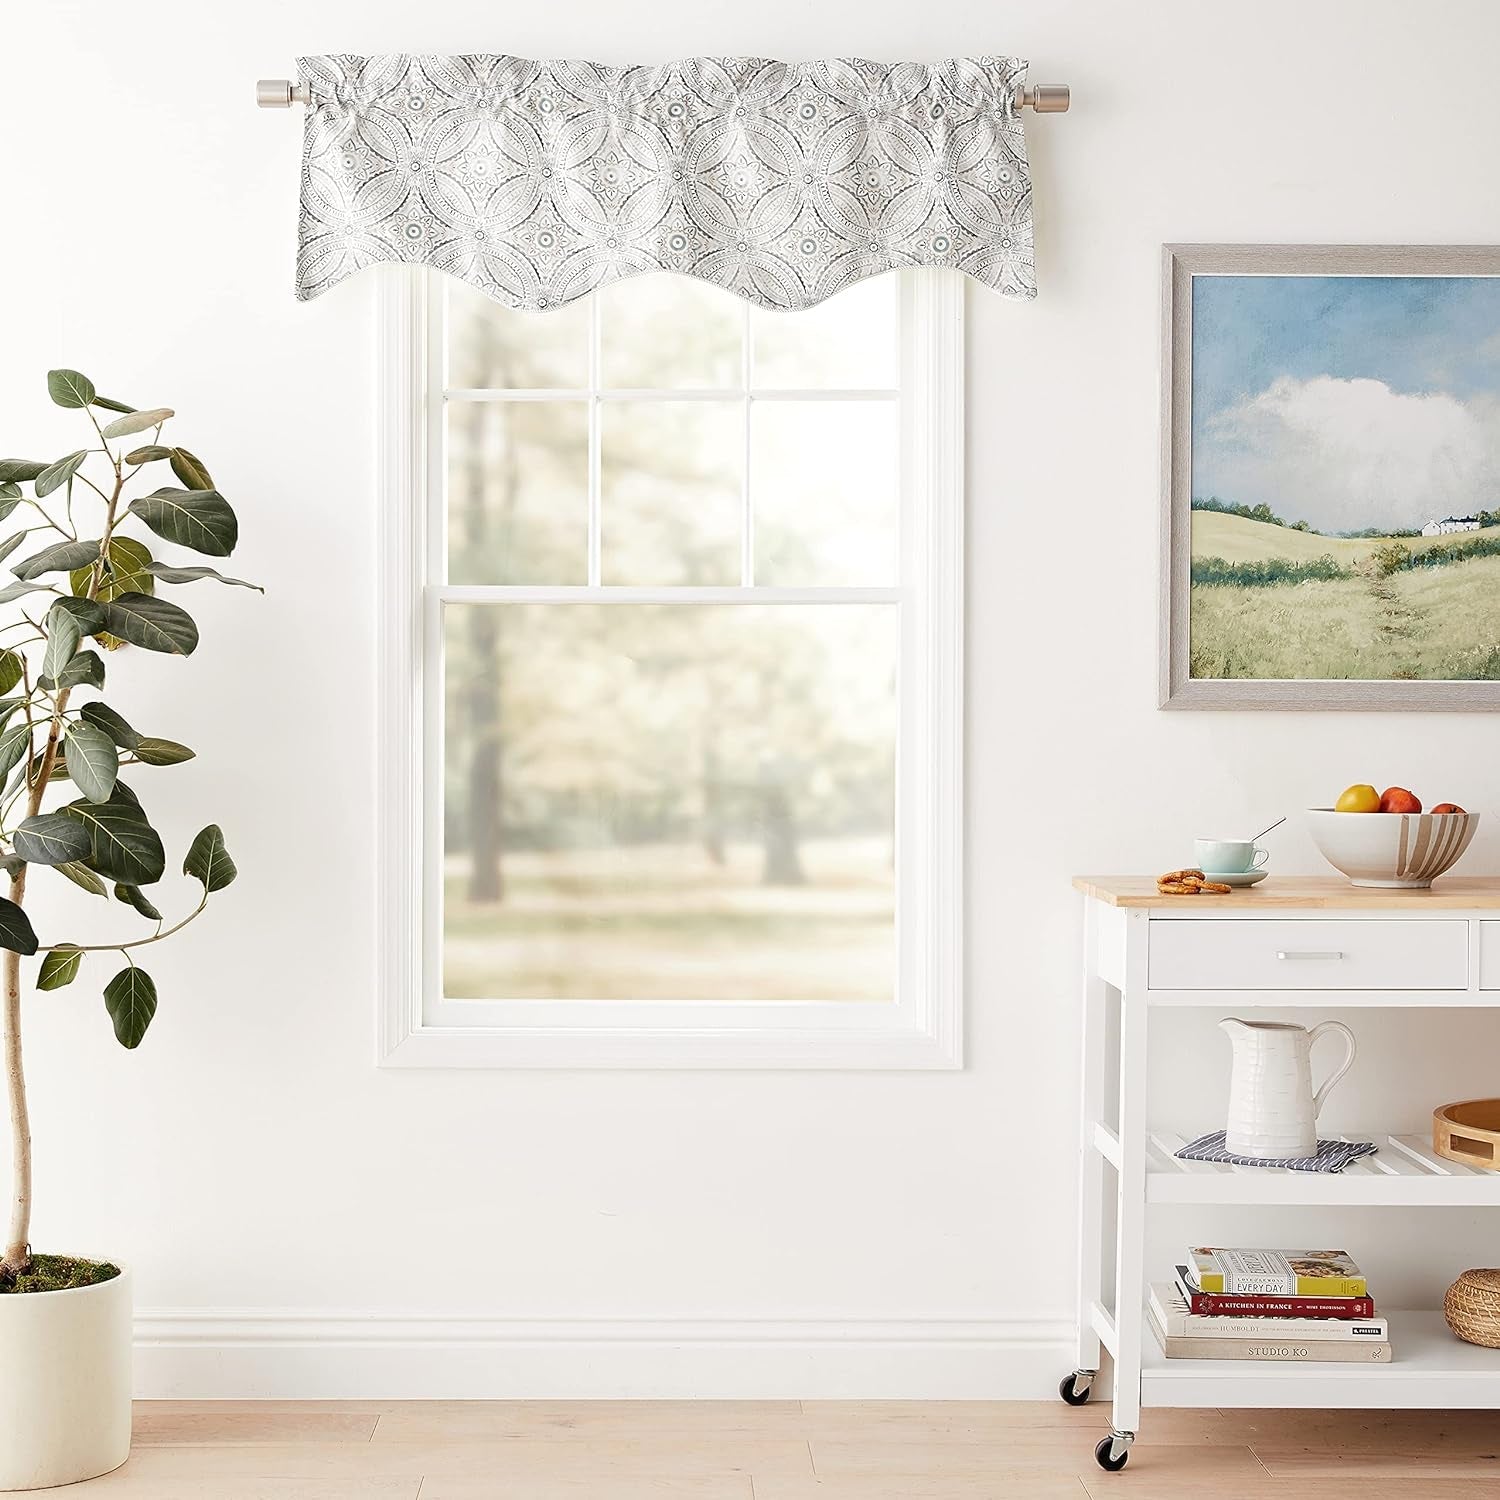 Ellis Curtain Blissfulness 50" X 15" Lined Scallop Valance, White